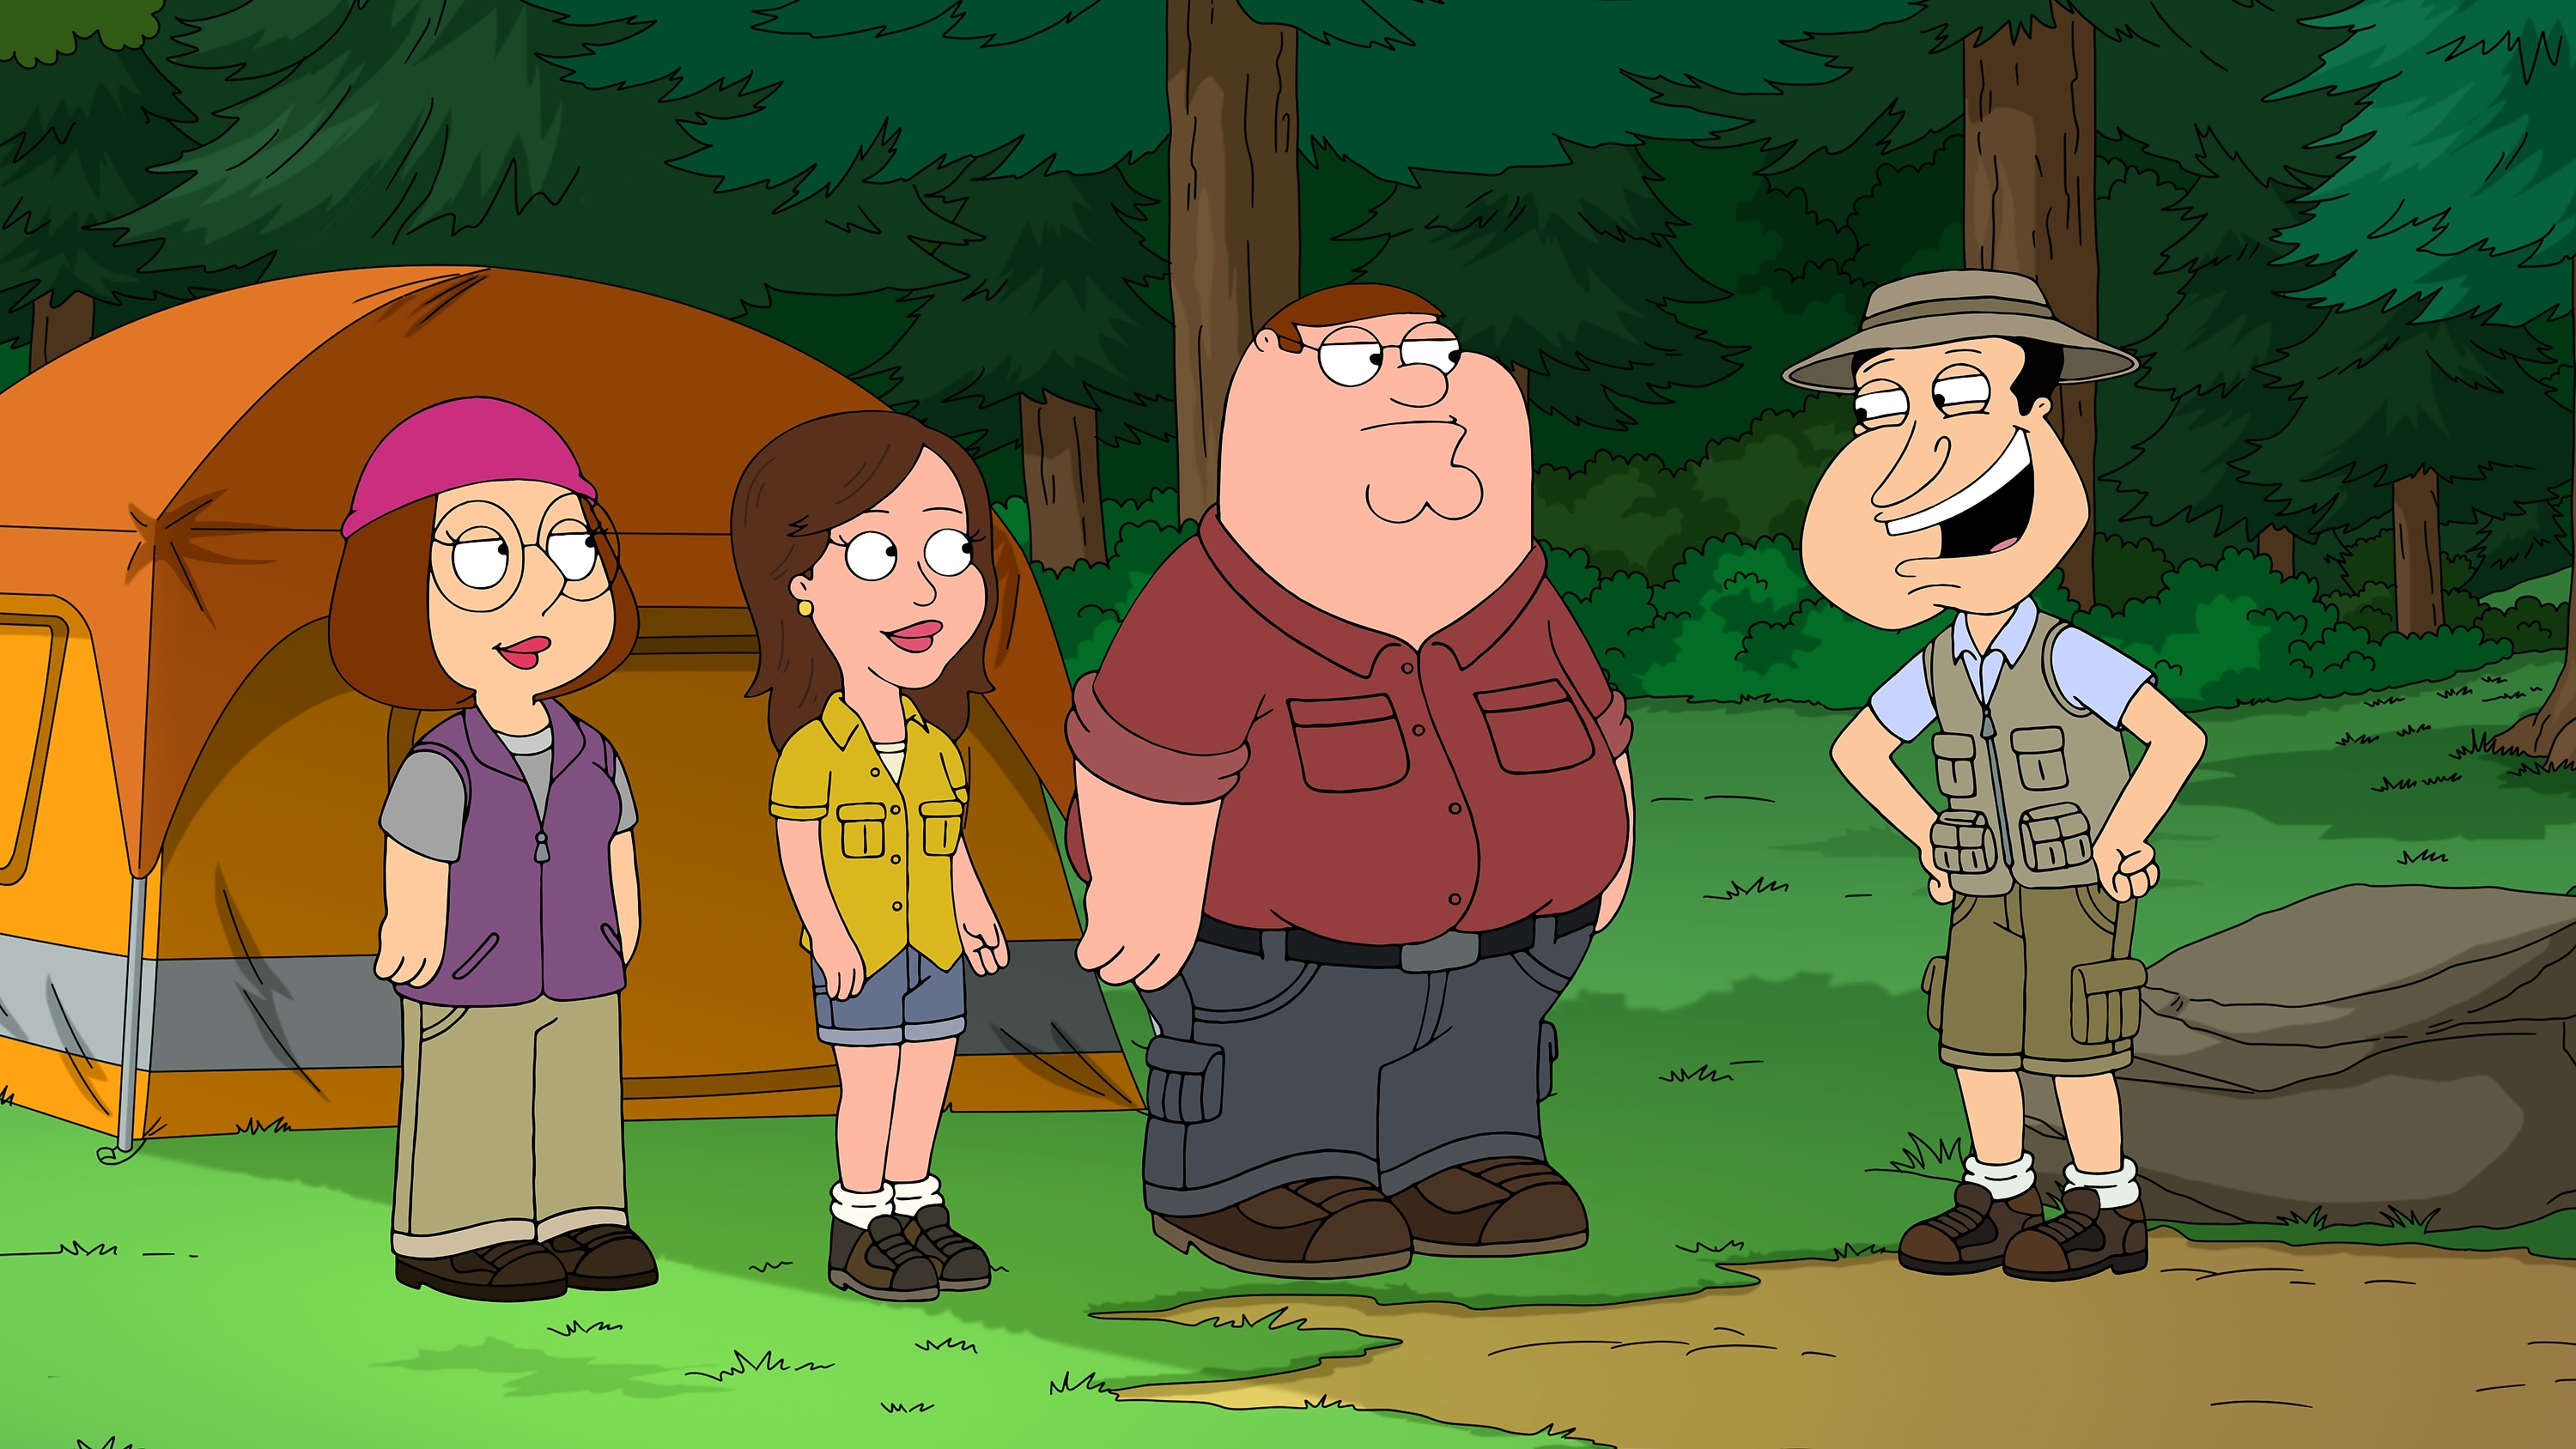 'Family Guy' characters Meg Griffin, Courtney, Peter Griffin, and Glenn Quagmire in a camping scene.